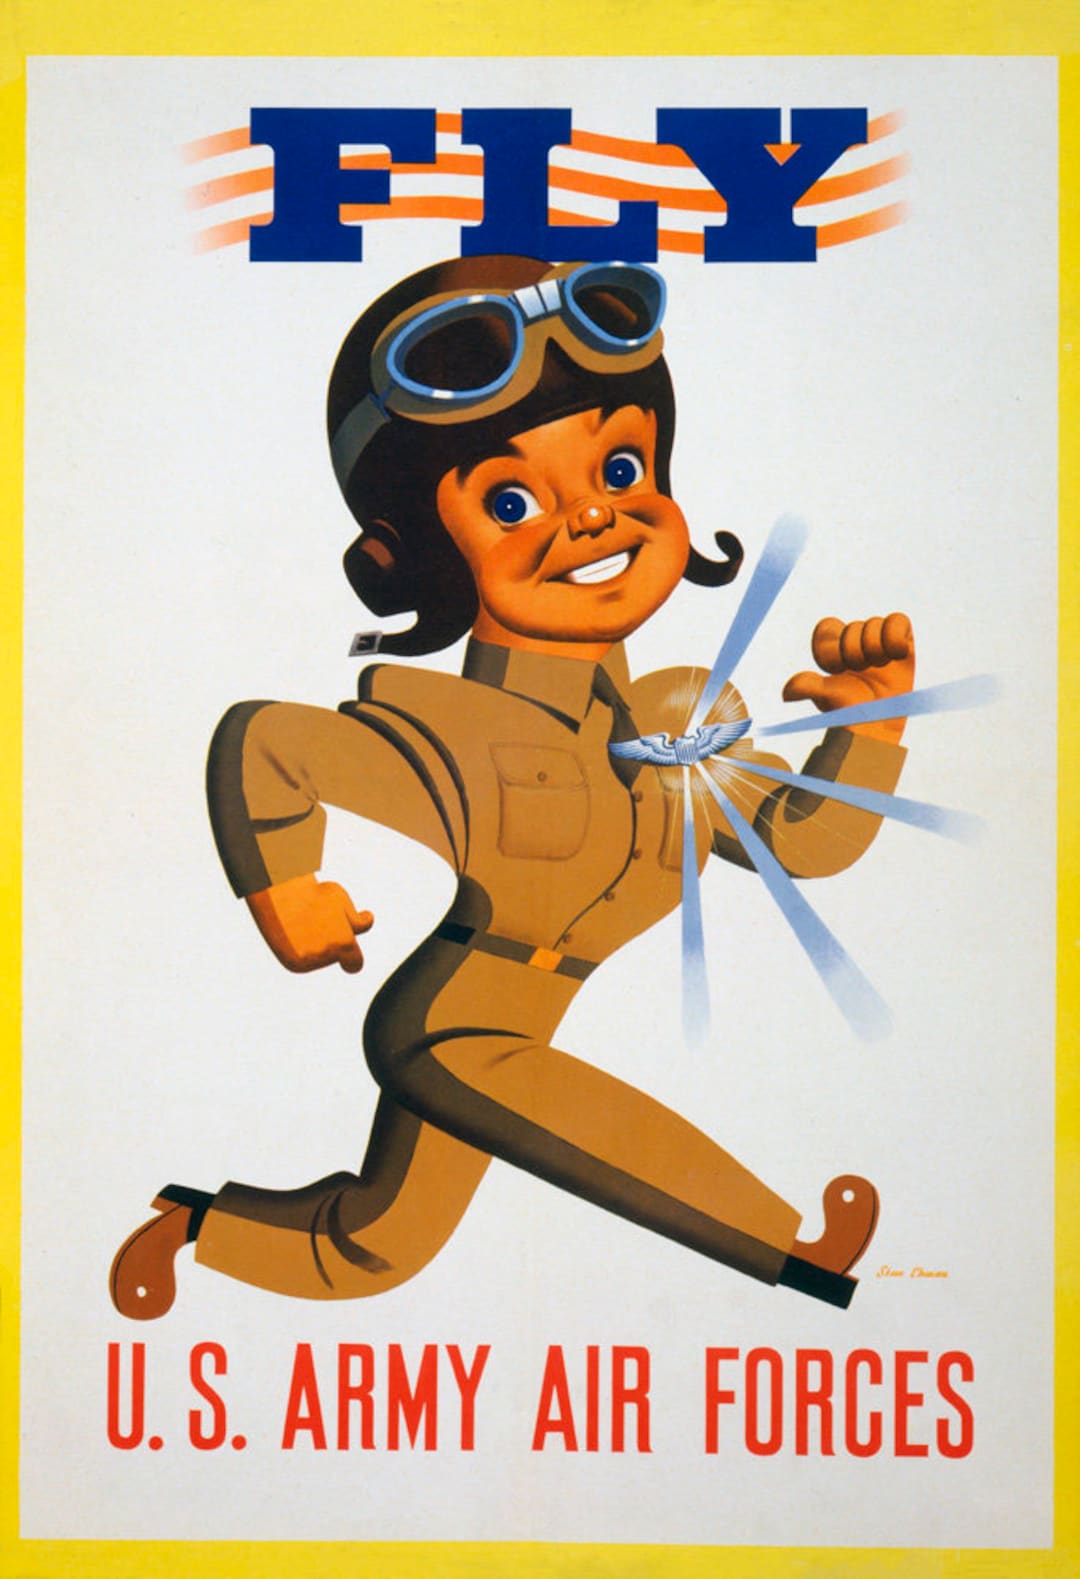 To Victory Recruiting Air Force WW2 Poster vintage - B 17